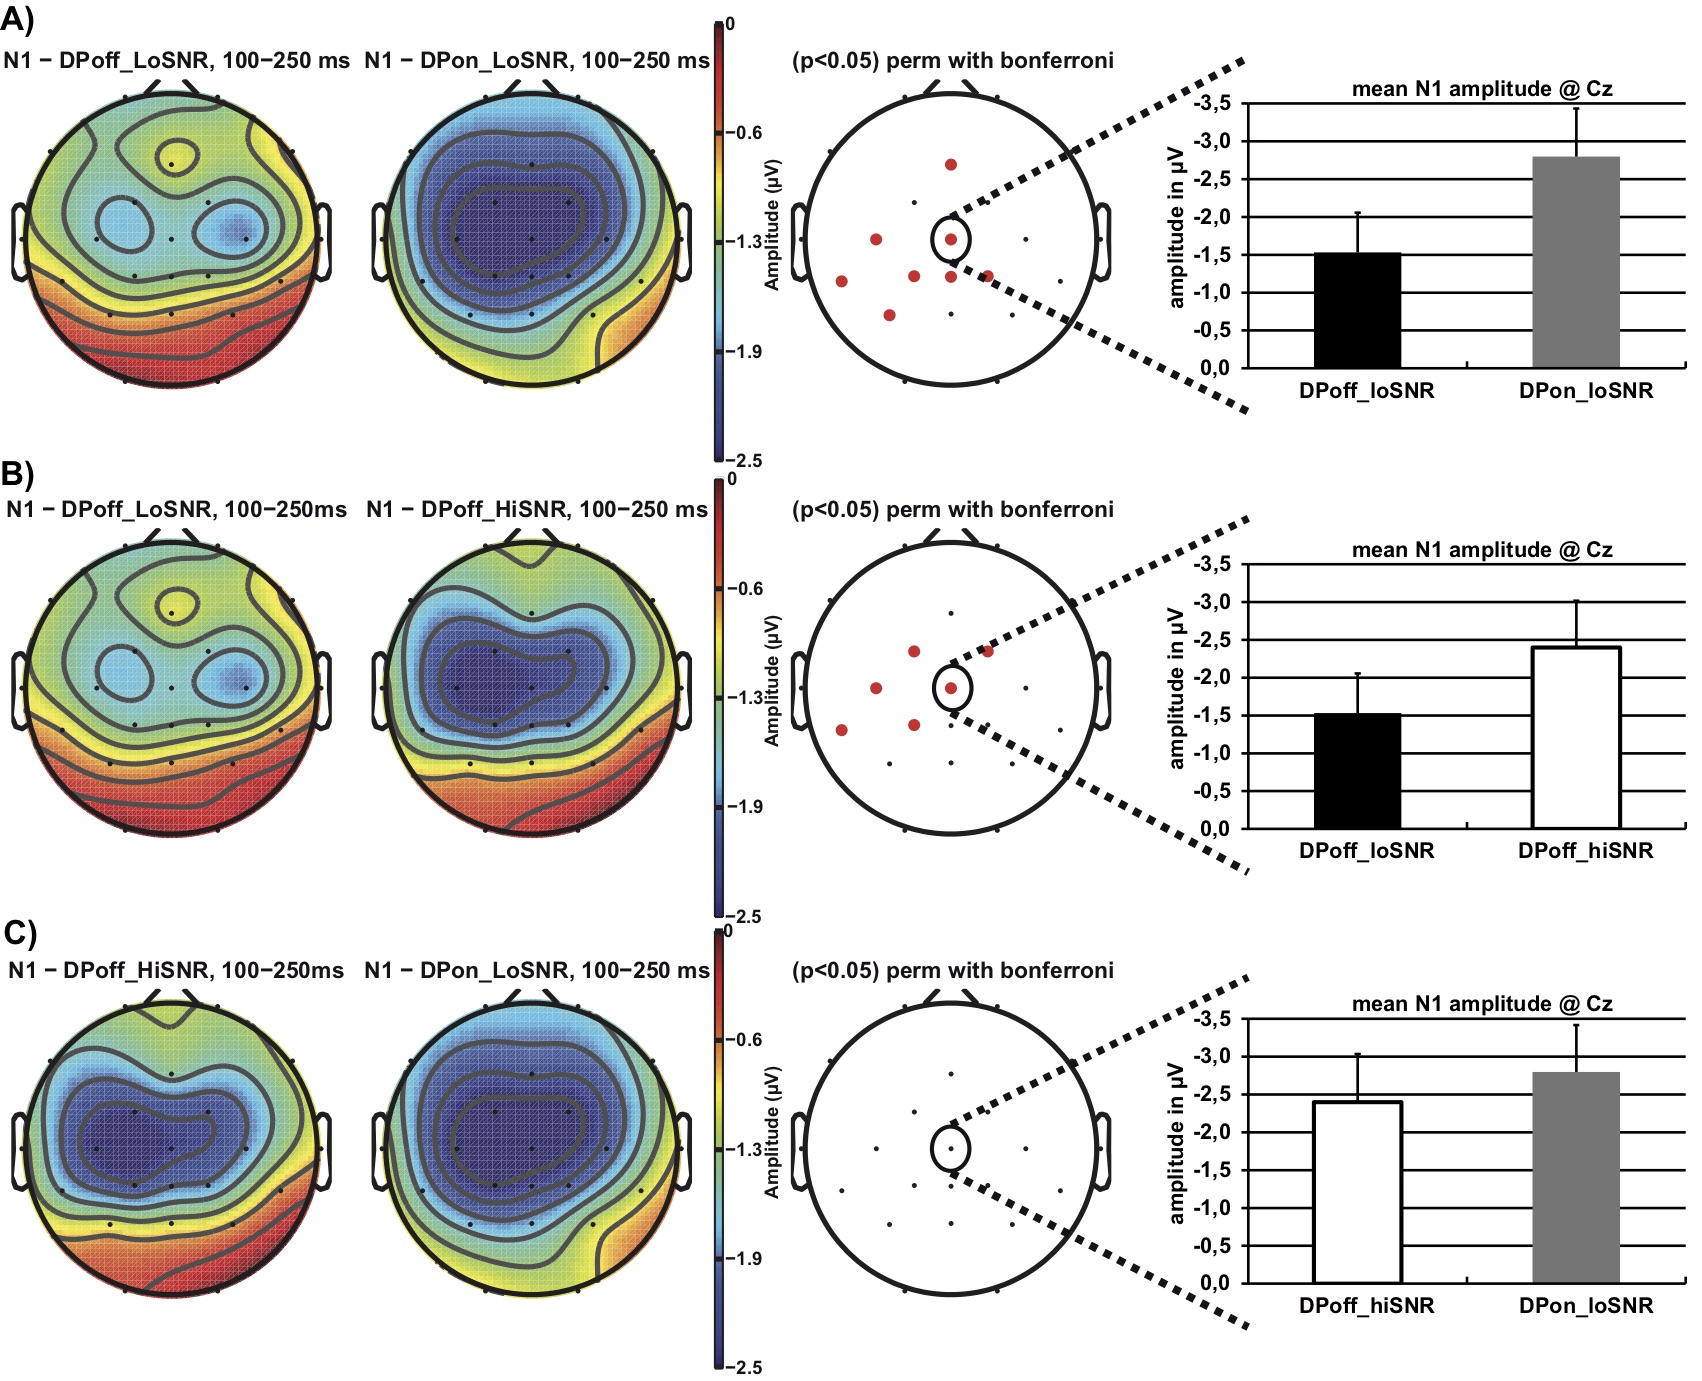 Topographical distribution of the N1 amplitude after stimulus onset contrasting the conditions